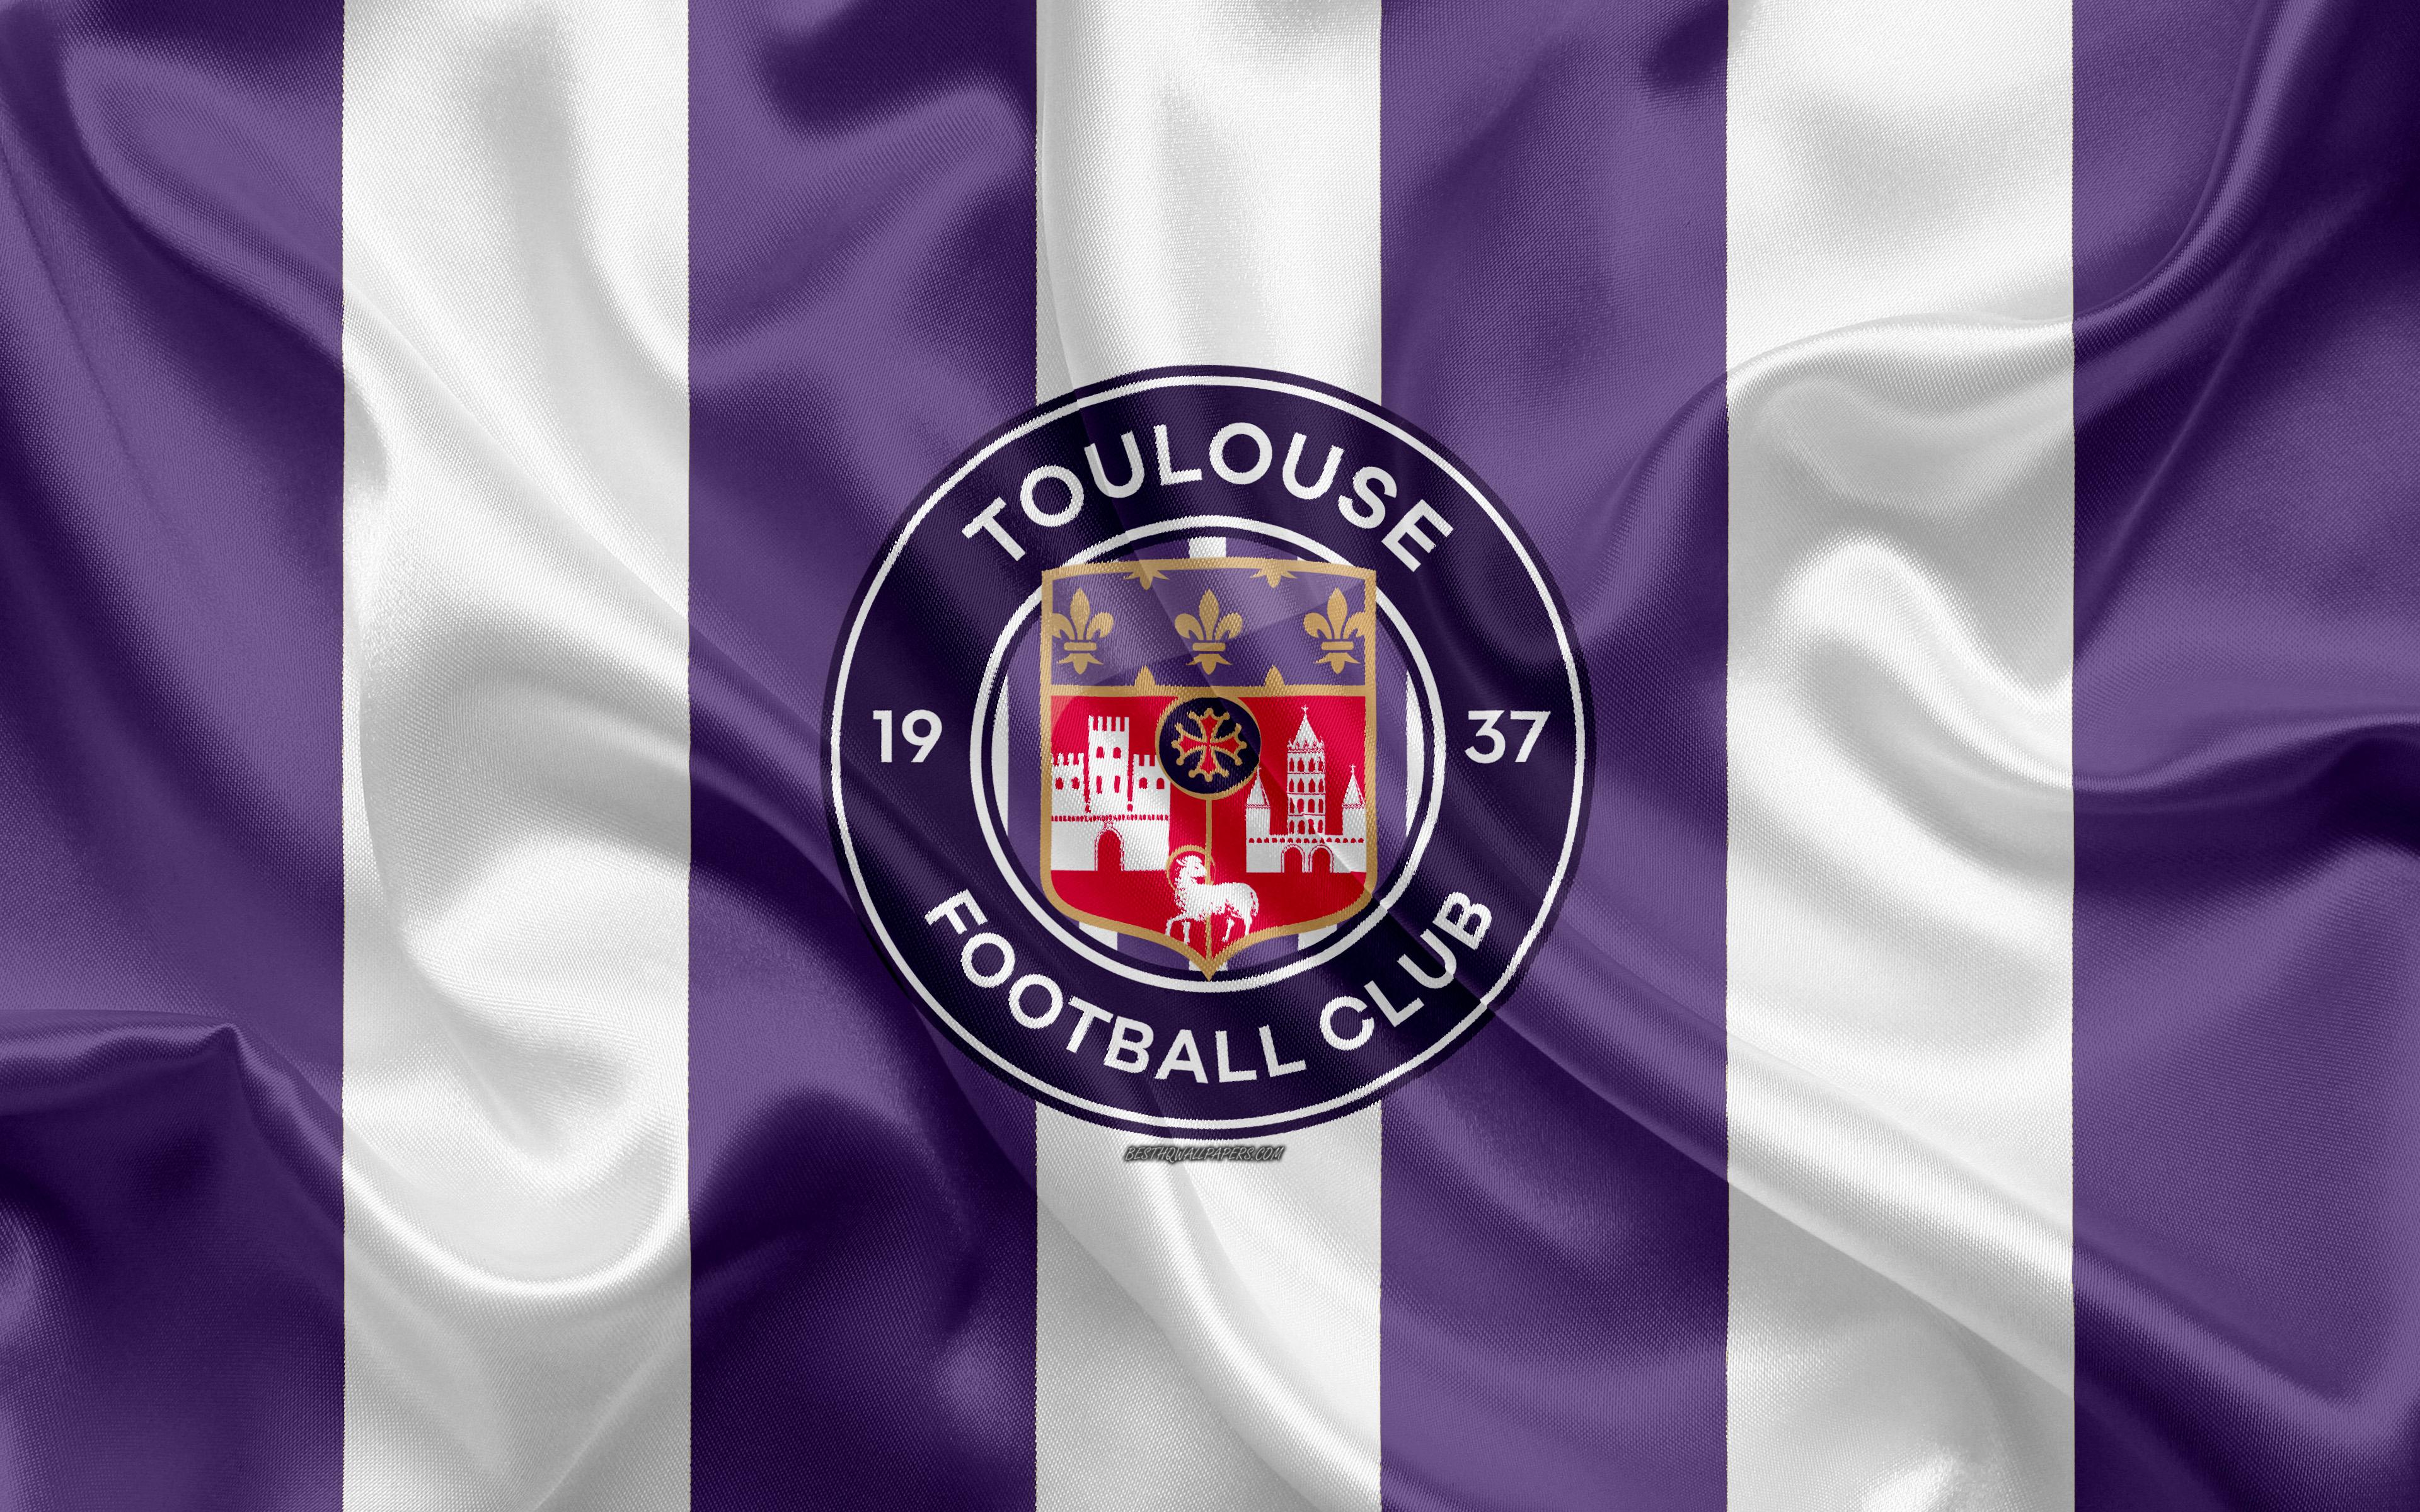 Download wallpaper Toulouse FC, new logo, 4k, french football club